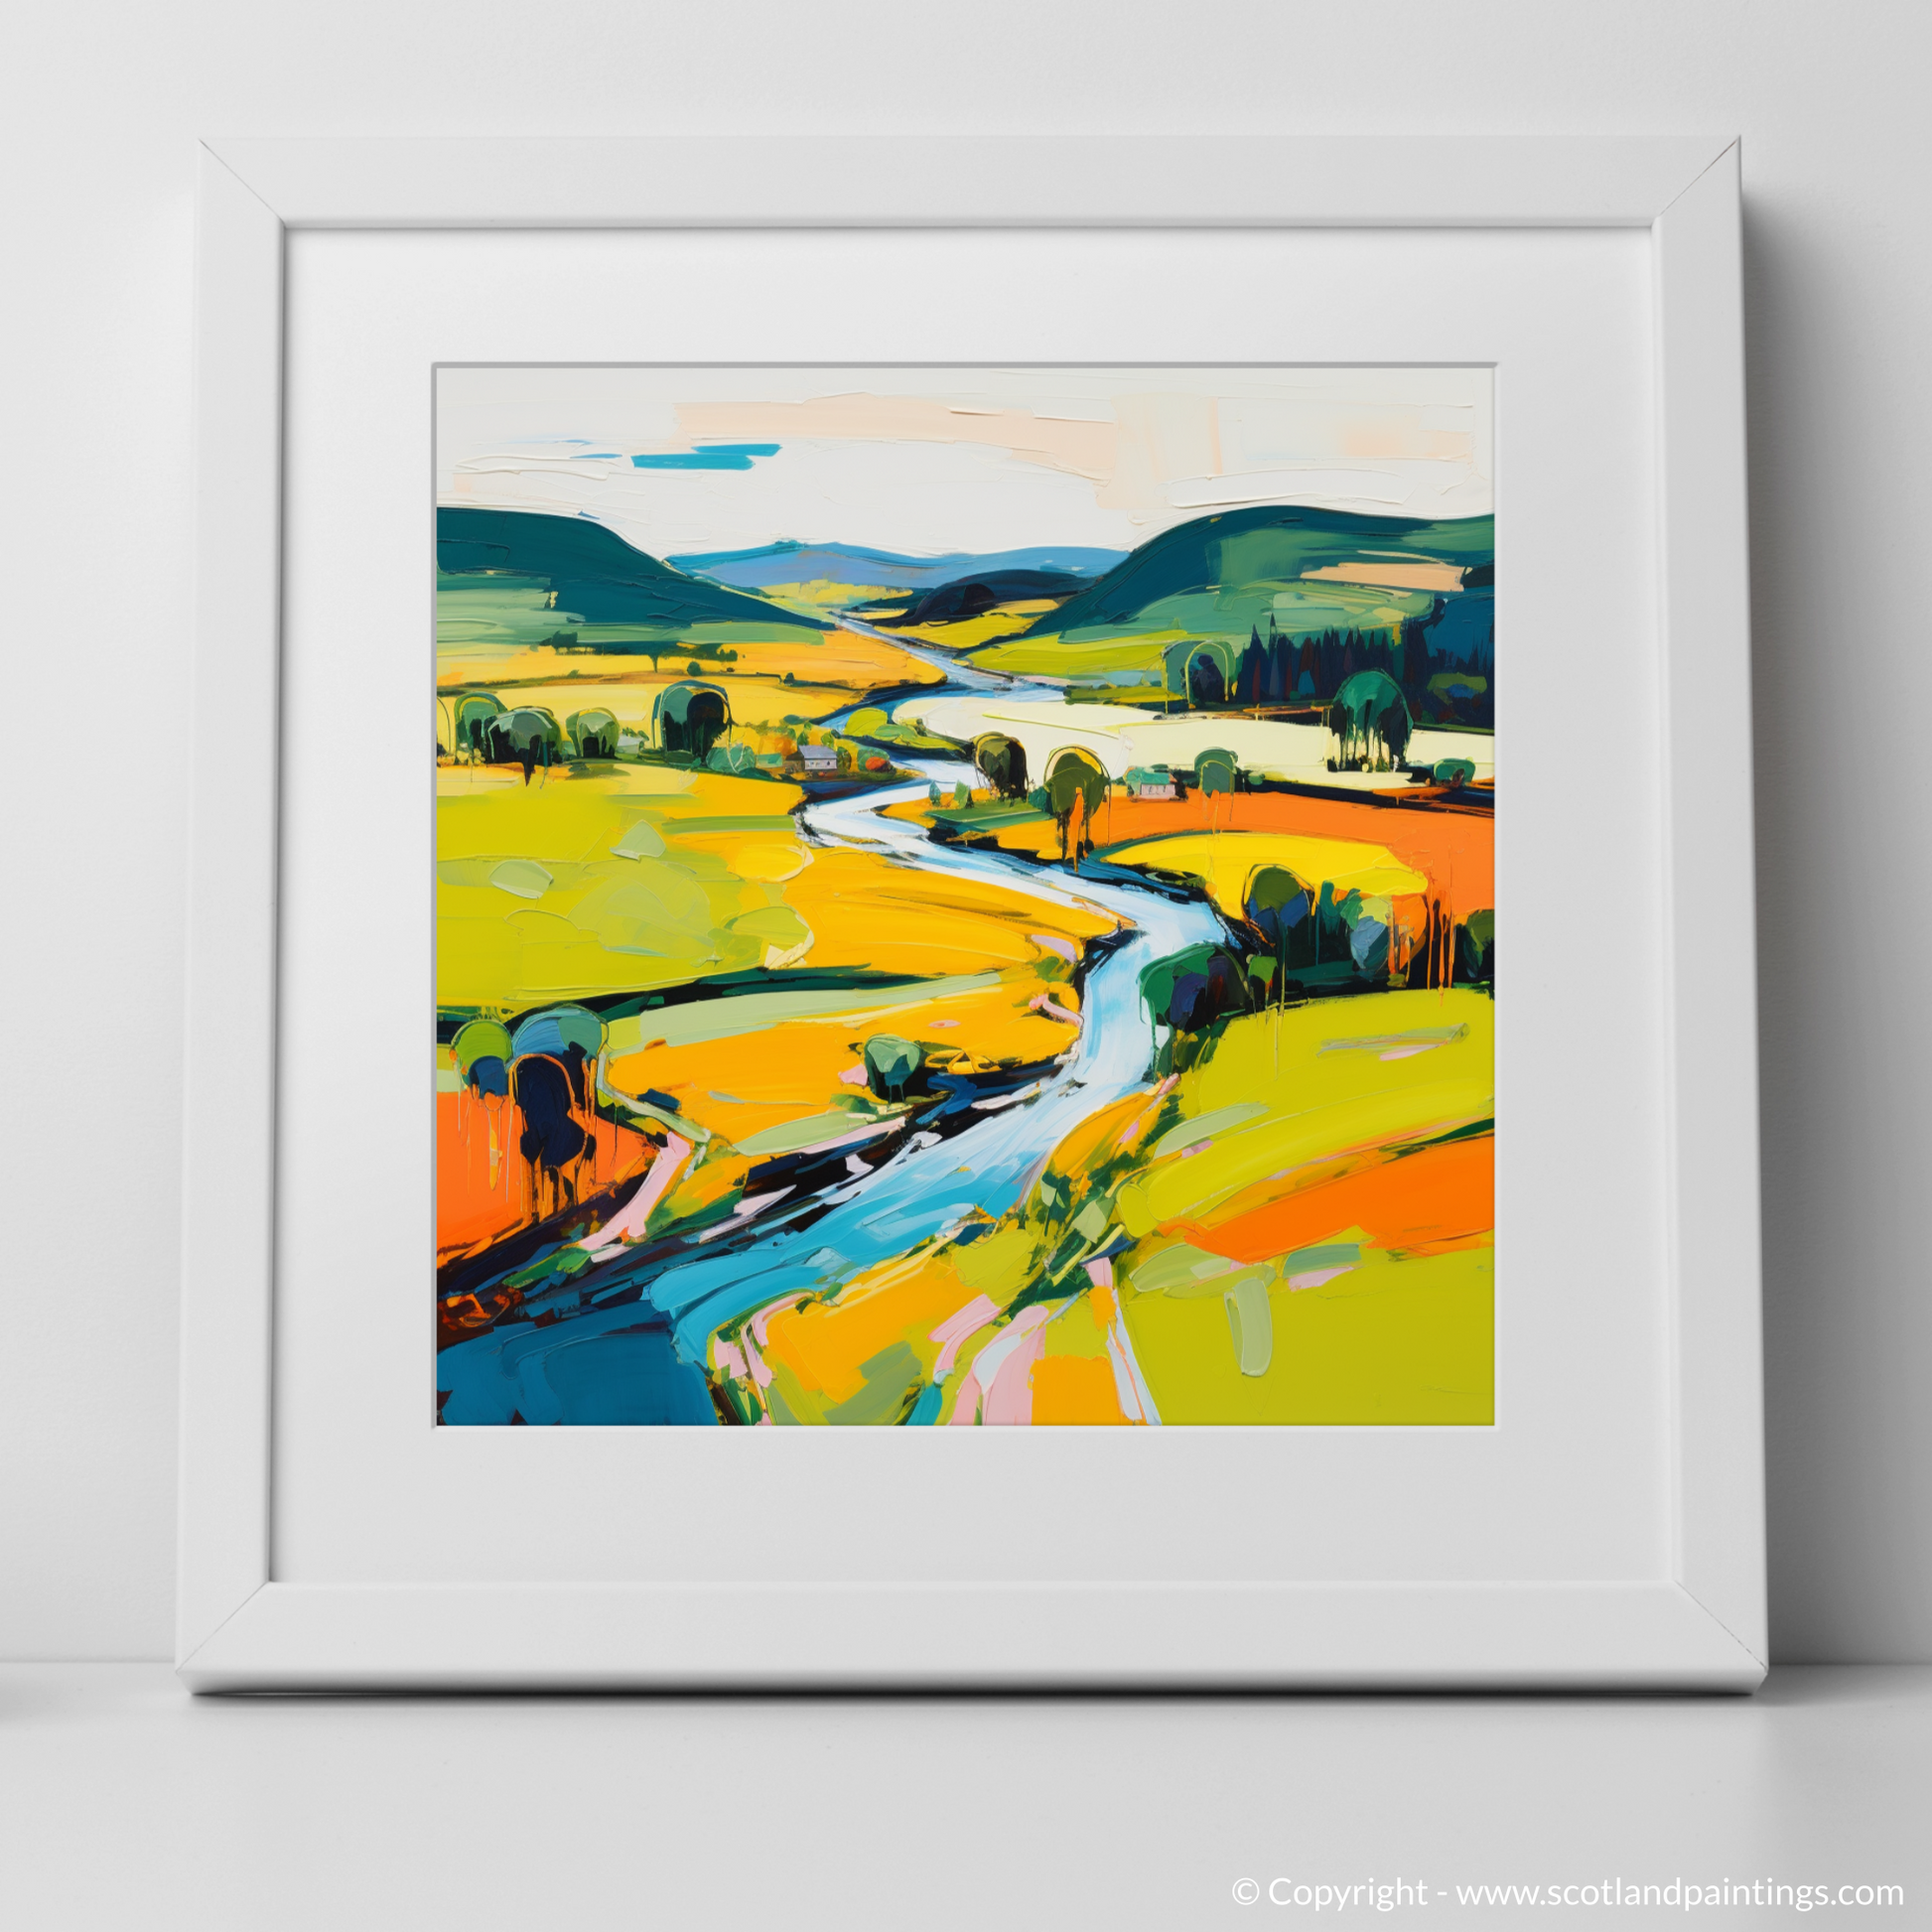 Art Print of River Tweed, Scottish Borders in summer with a white frame